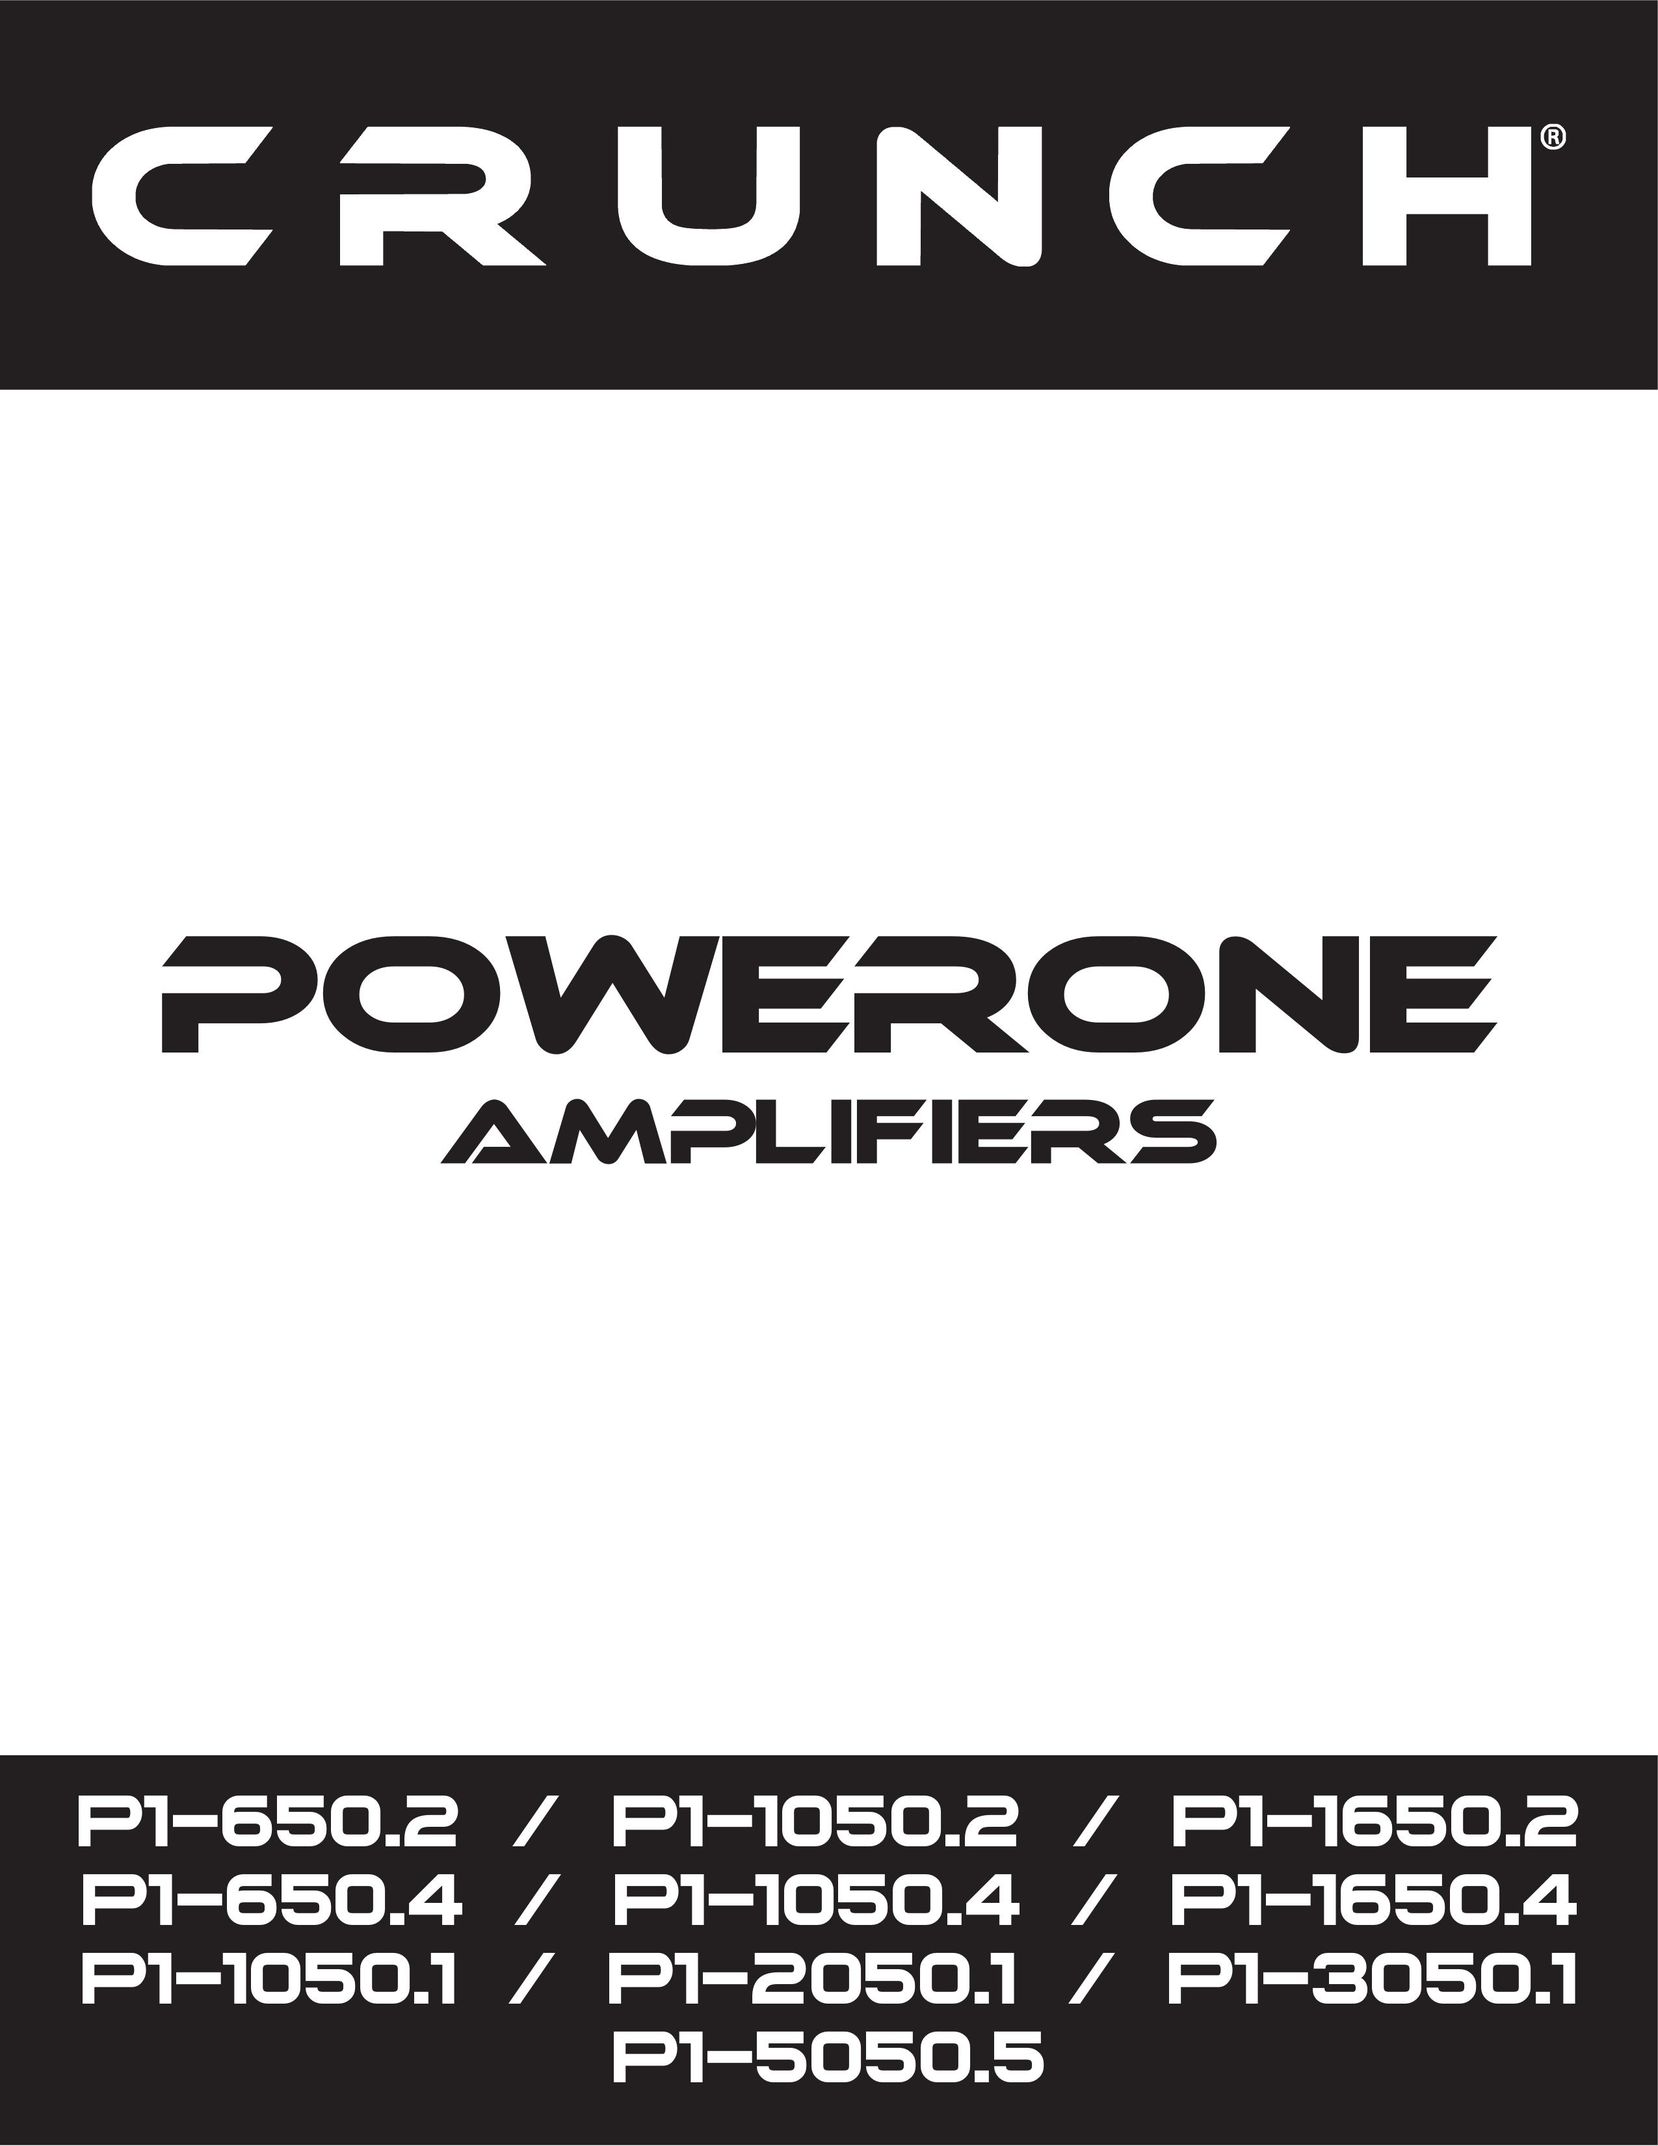 Crunch P1-1650.4 Stereo Amplifier User Manual